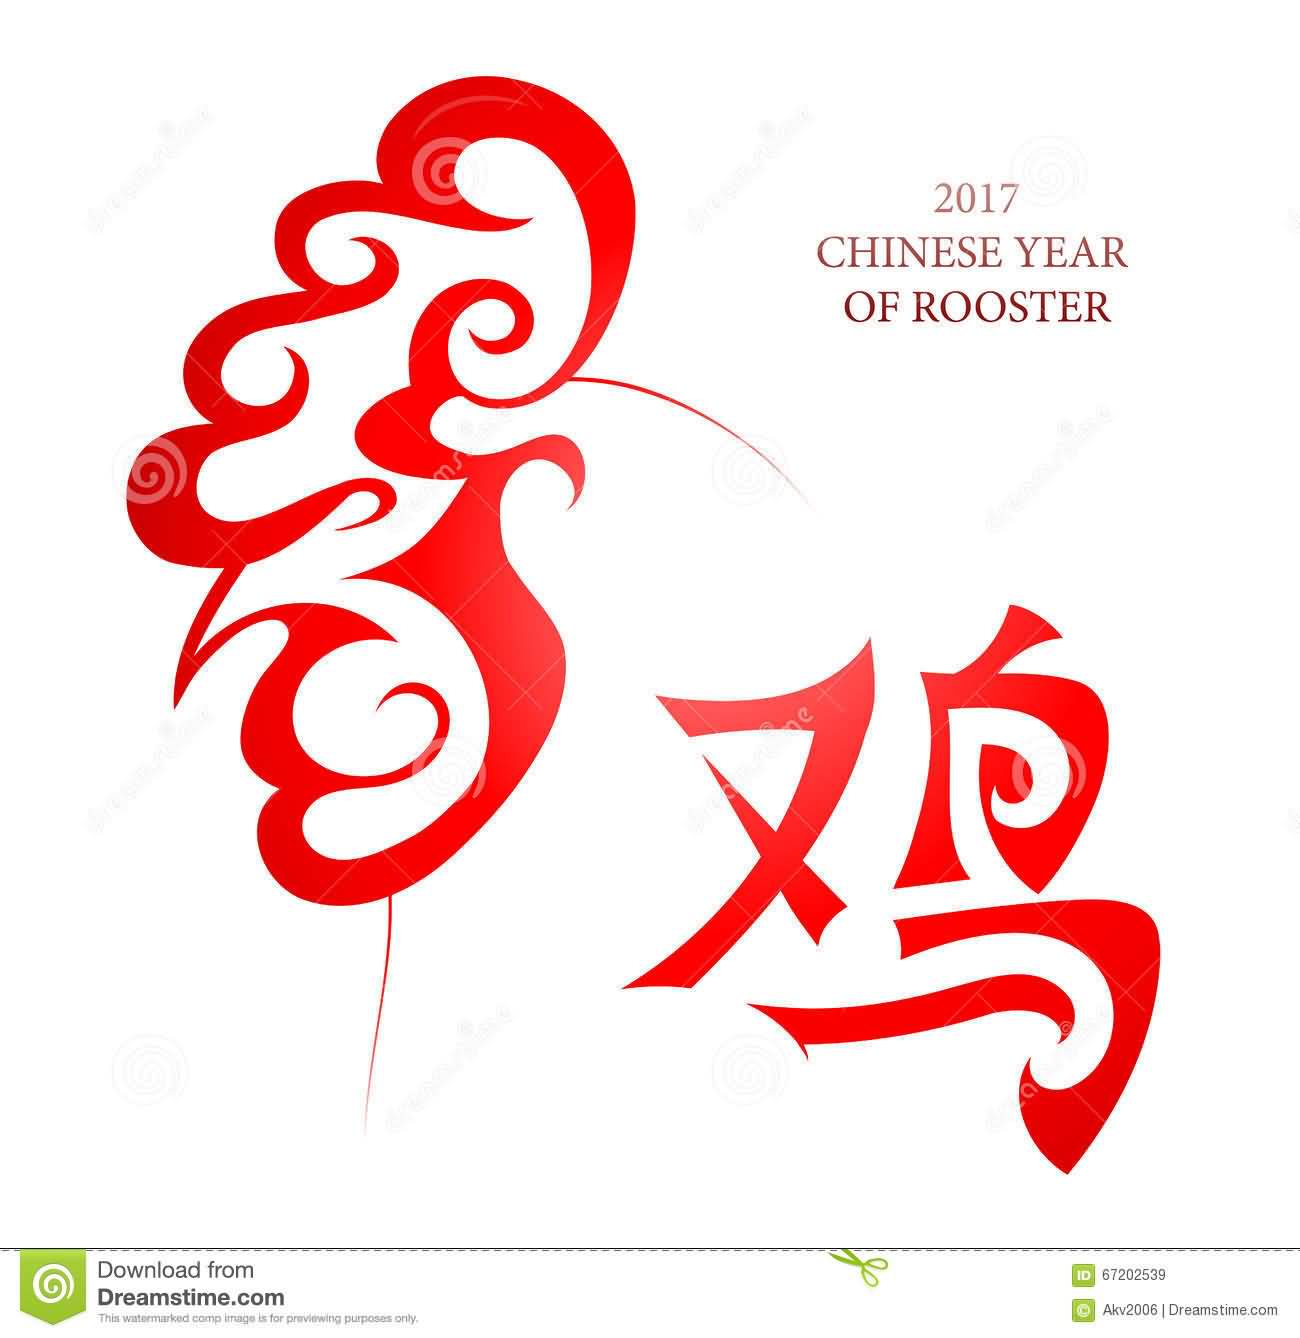 2017 Chinese Year Of Rooster